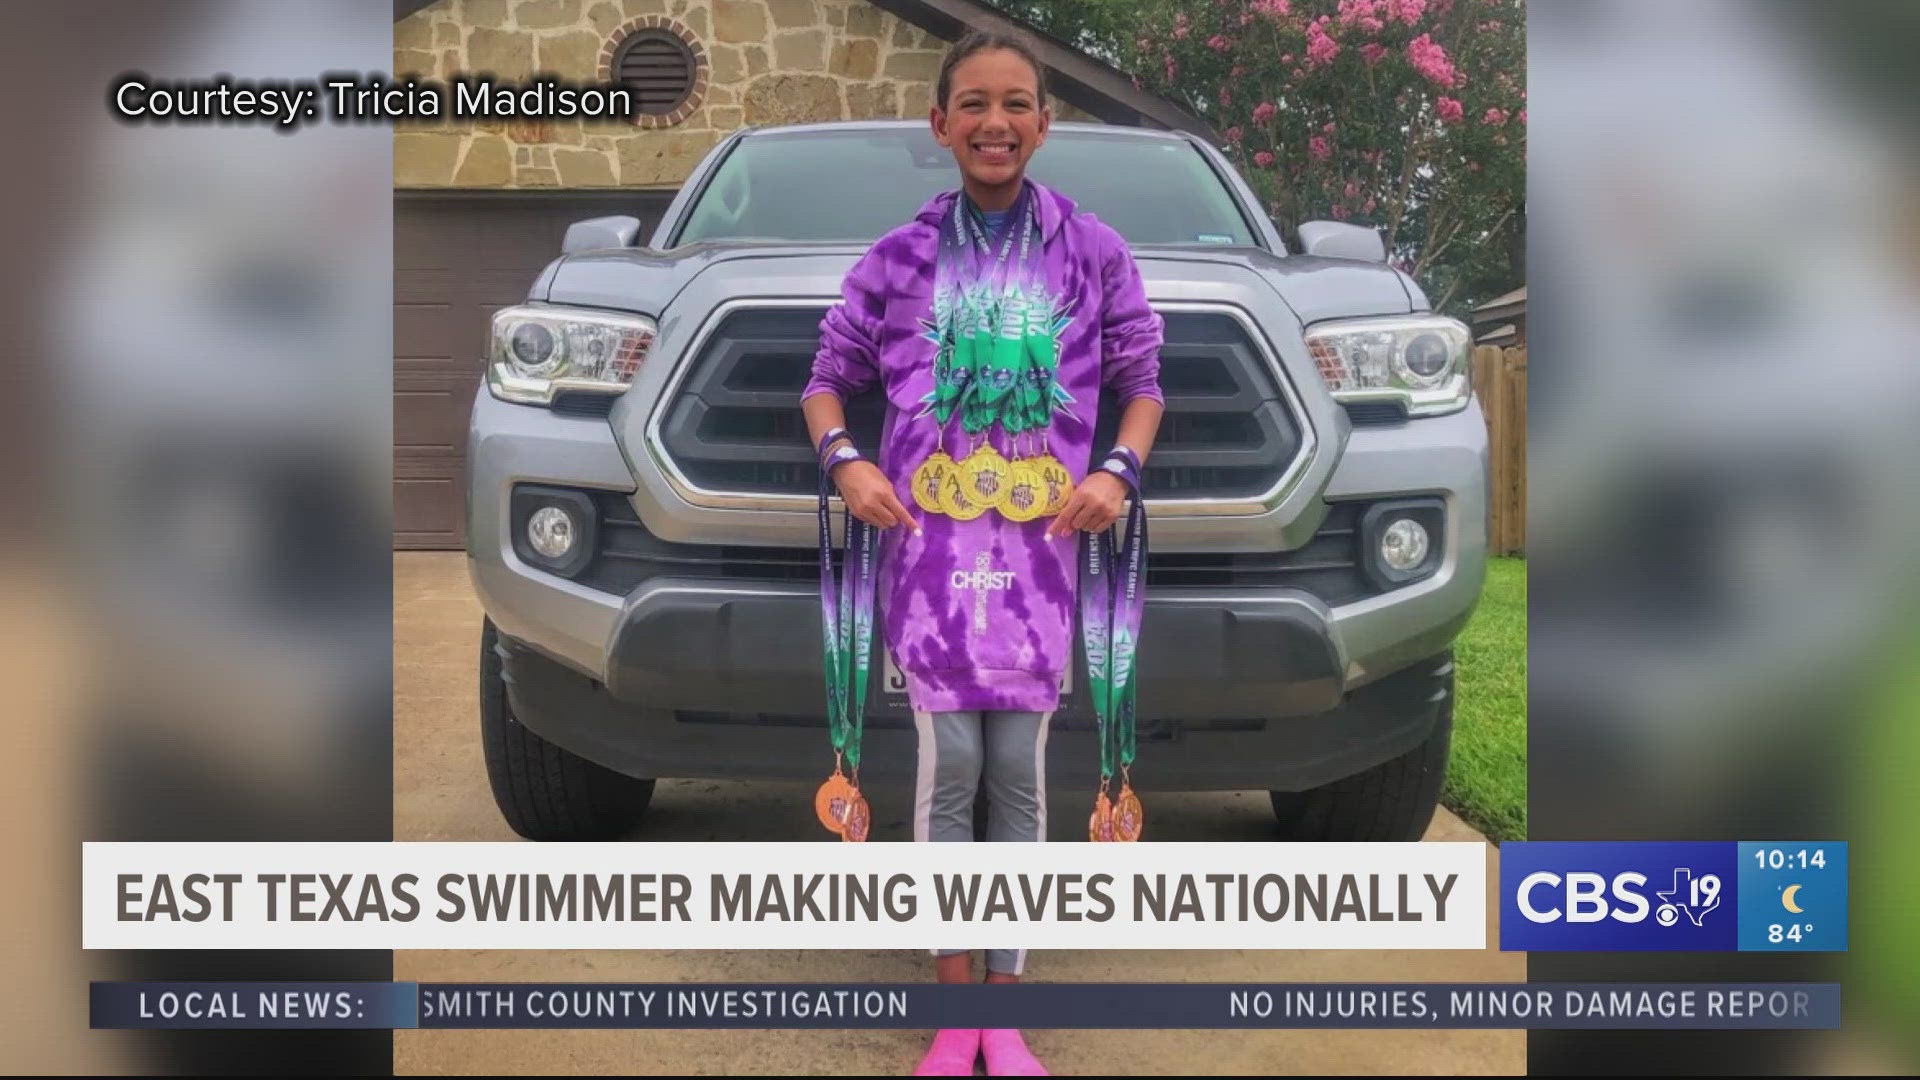 Aubree Madison participated in six individual events, and despite competing in some groups as big as 118 swimmers, she came in first place in every single one.